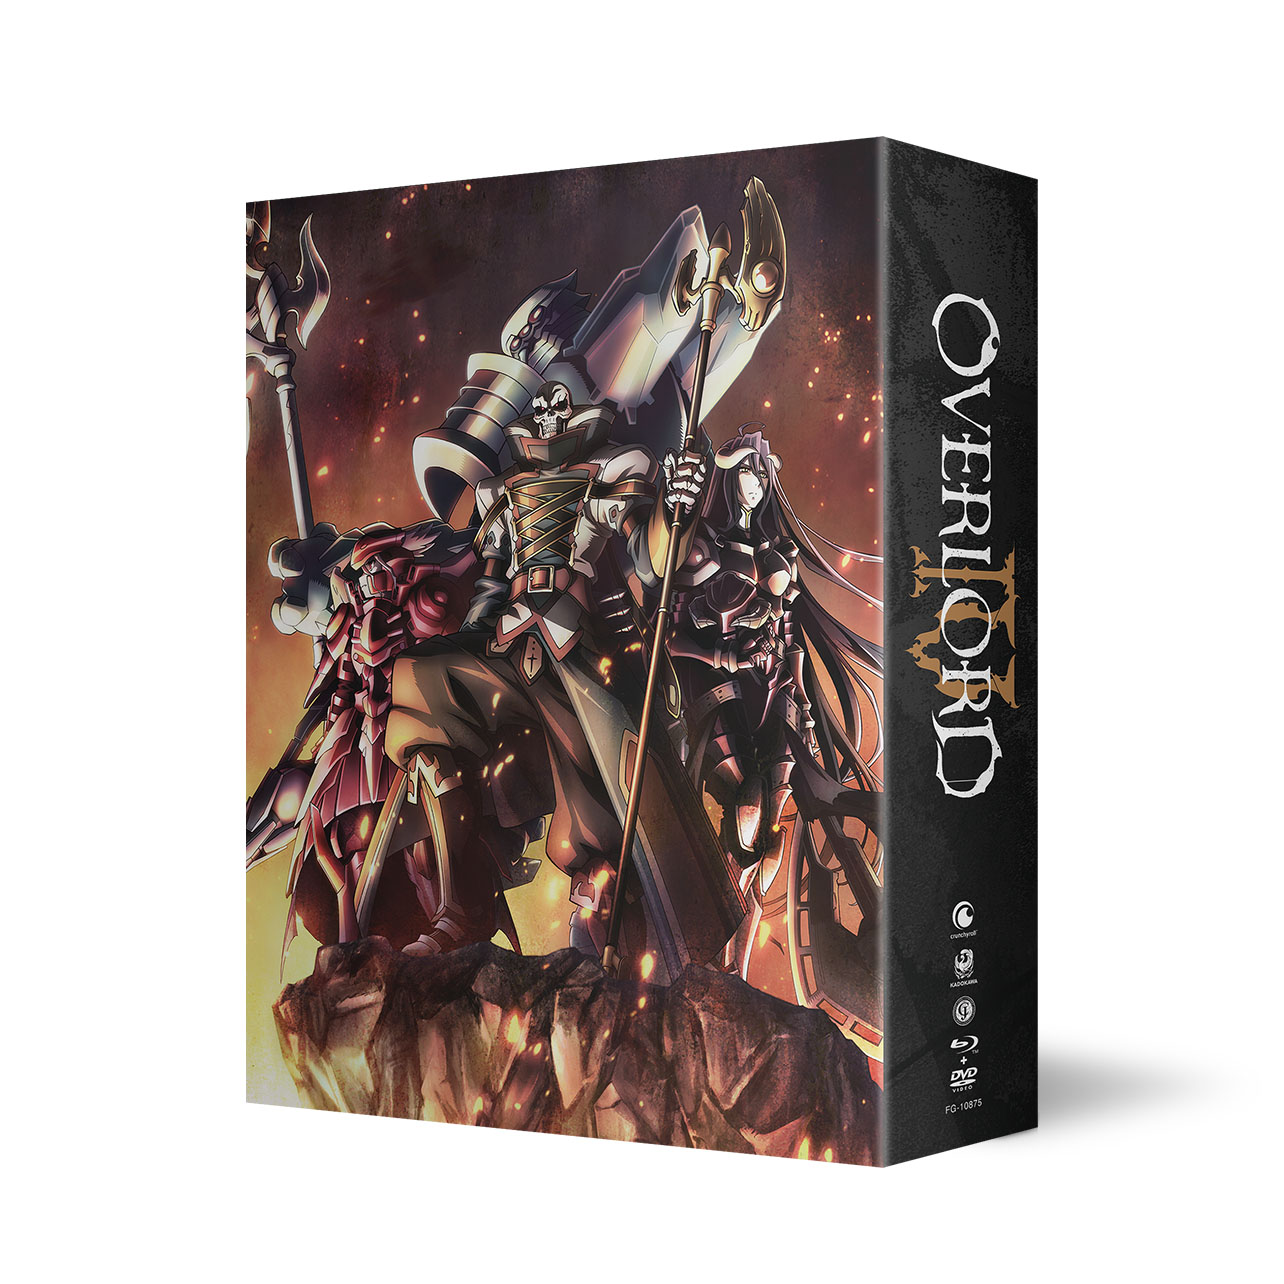 Crunchyroll Store on X: We've got the newest home video releases and  pre-orders, such as Overlord IV Season 4 Limited Edition! 🔥 Don't miss  picking up your favorite titles, especially if you